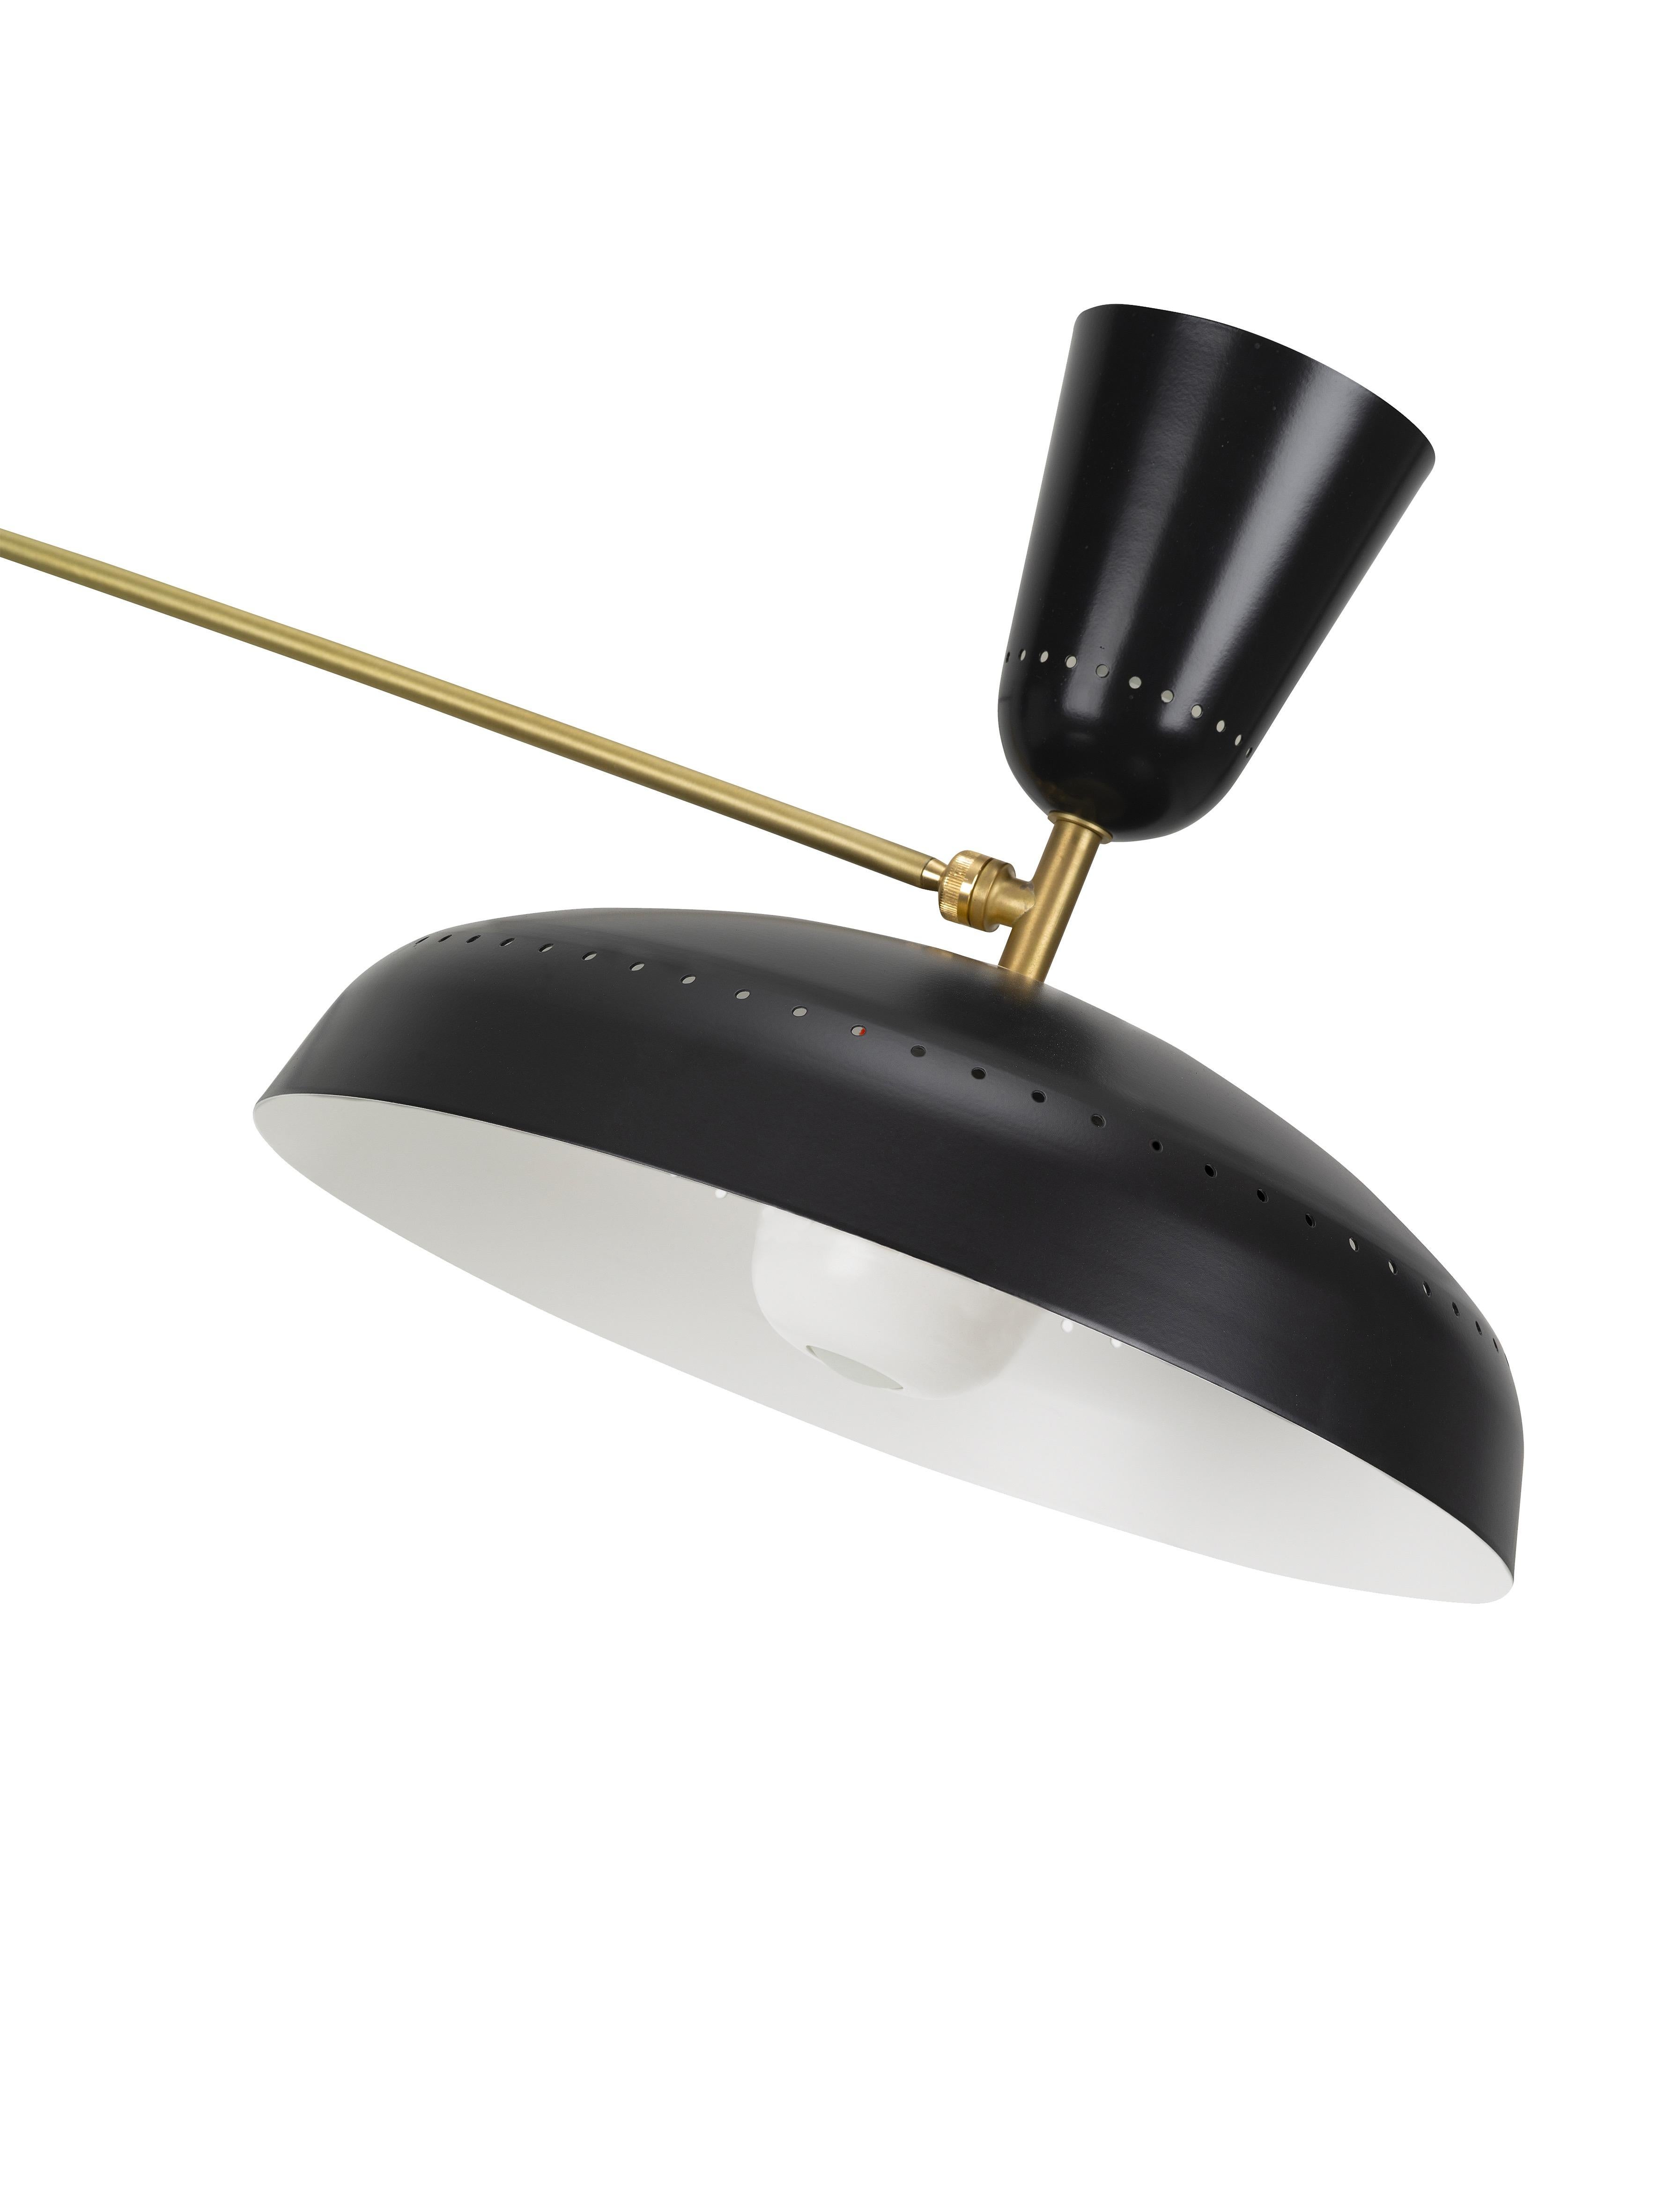 Large Pierre Guariche 'G1' Wall Lamp for Sammode Studio in Black For Sale 1